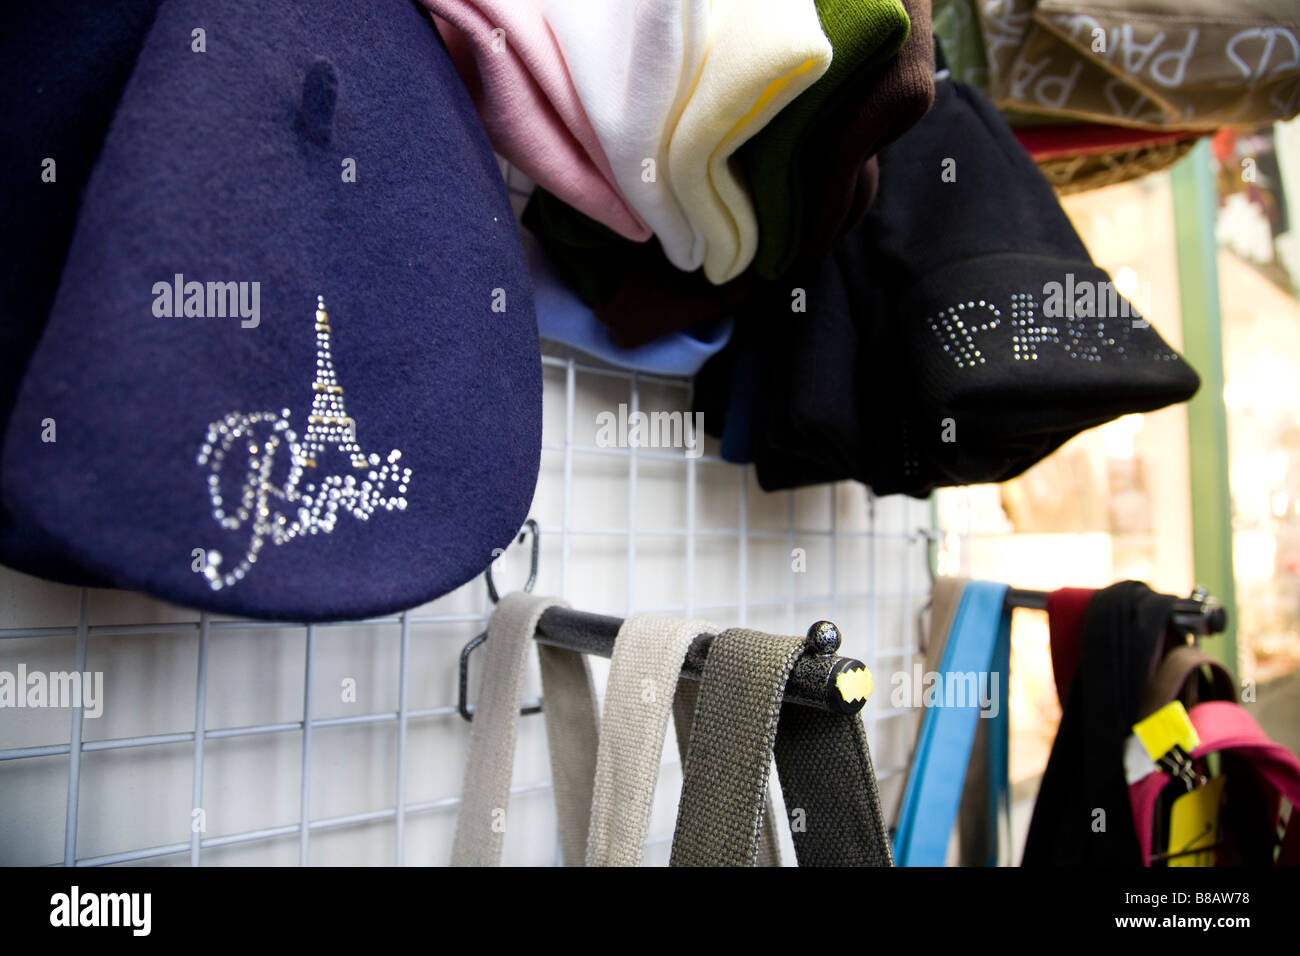 A collection of hats on a market stall in Paris. Stock Photo